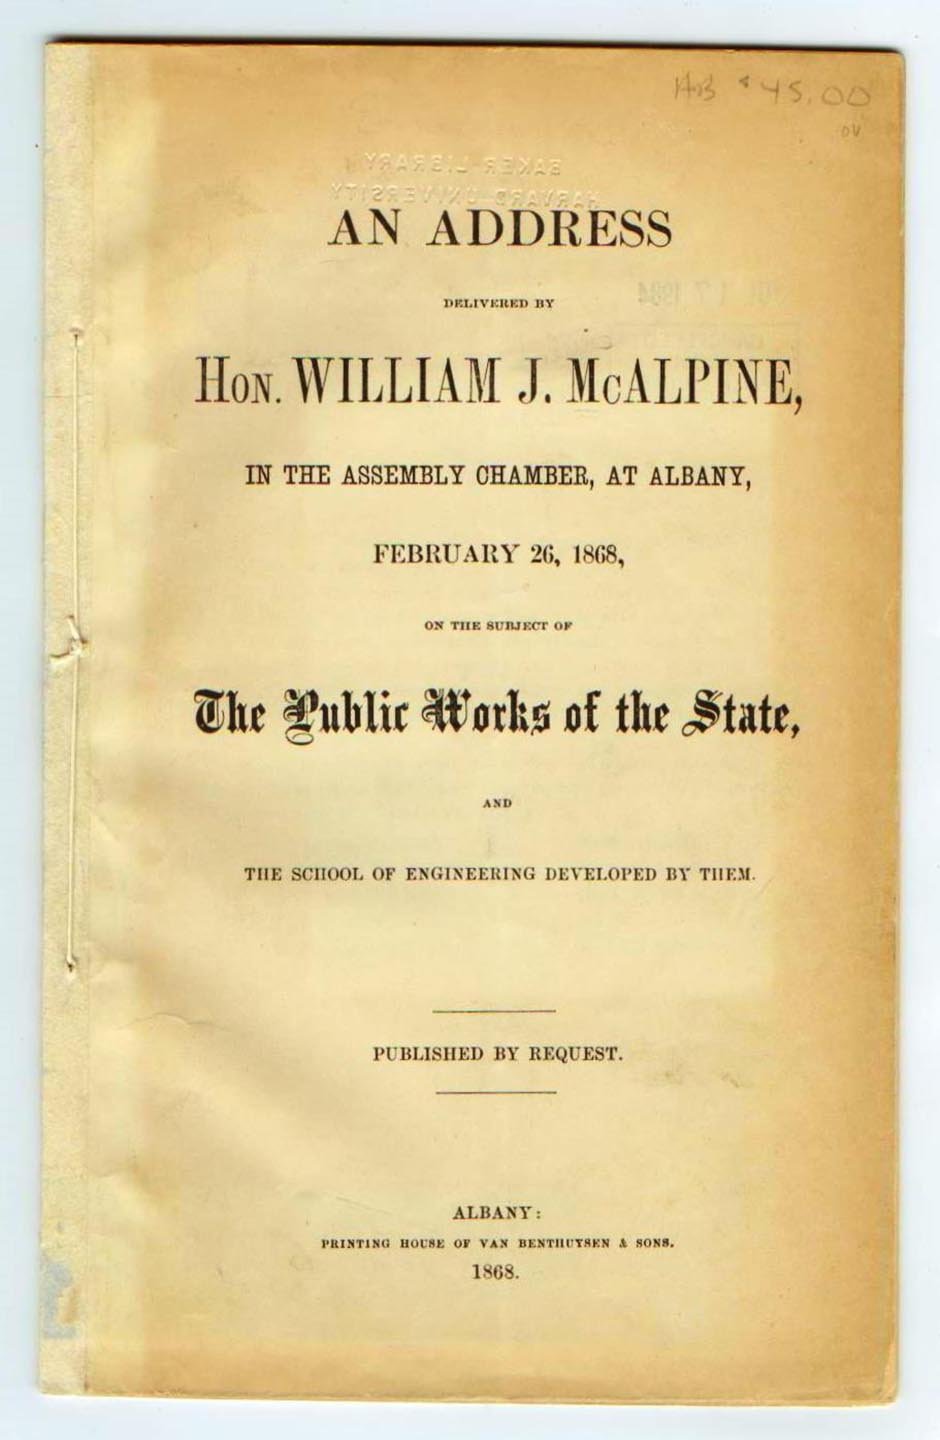 An Address delivered by Hon. William J. McAlpine, in the Assembly Chamber, at Albany, February 26, 1868, on the subject of The Public Works of the State, and the School of Engineering developed by them